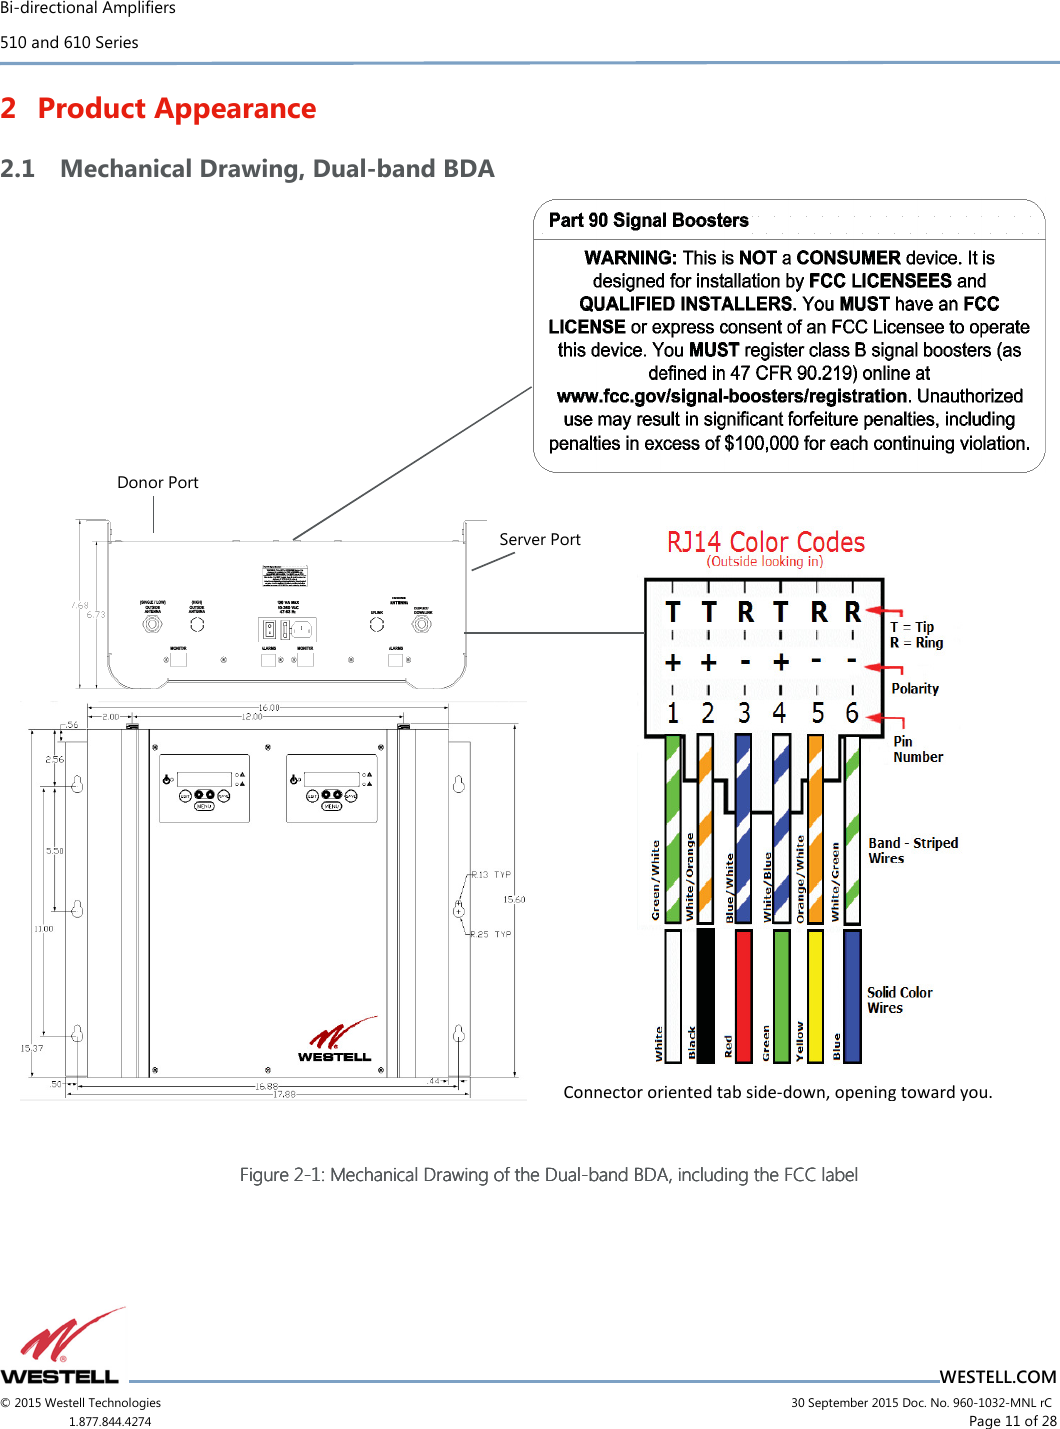 Bi-directional Amplifiers 510 and 610 Series                                    WESTELL.COM © 2015 Westell Technologies                             30 September 2015 Doc. No. 960-1032-MNL rC 1.877.844.4274                     Page 11 of 28  2 Product Appearance 2.1 Mechanical Drawing, Dual-band BDA                        Figure Figure Figure Figure 2222----1111: Mechanical Drawing of the Dual: Mechanical Drawing of the Dual: Mechanical Drawing of the Dual: Mechanical Drawing of the Dual----band BDA, including the FCC labelband BDA, including the FCC labelband BDA, including the FCC labelband BDA, including the FCC label    Server Port Donor Port Connector oriented tab side-down, opening toward you. 